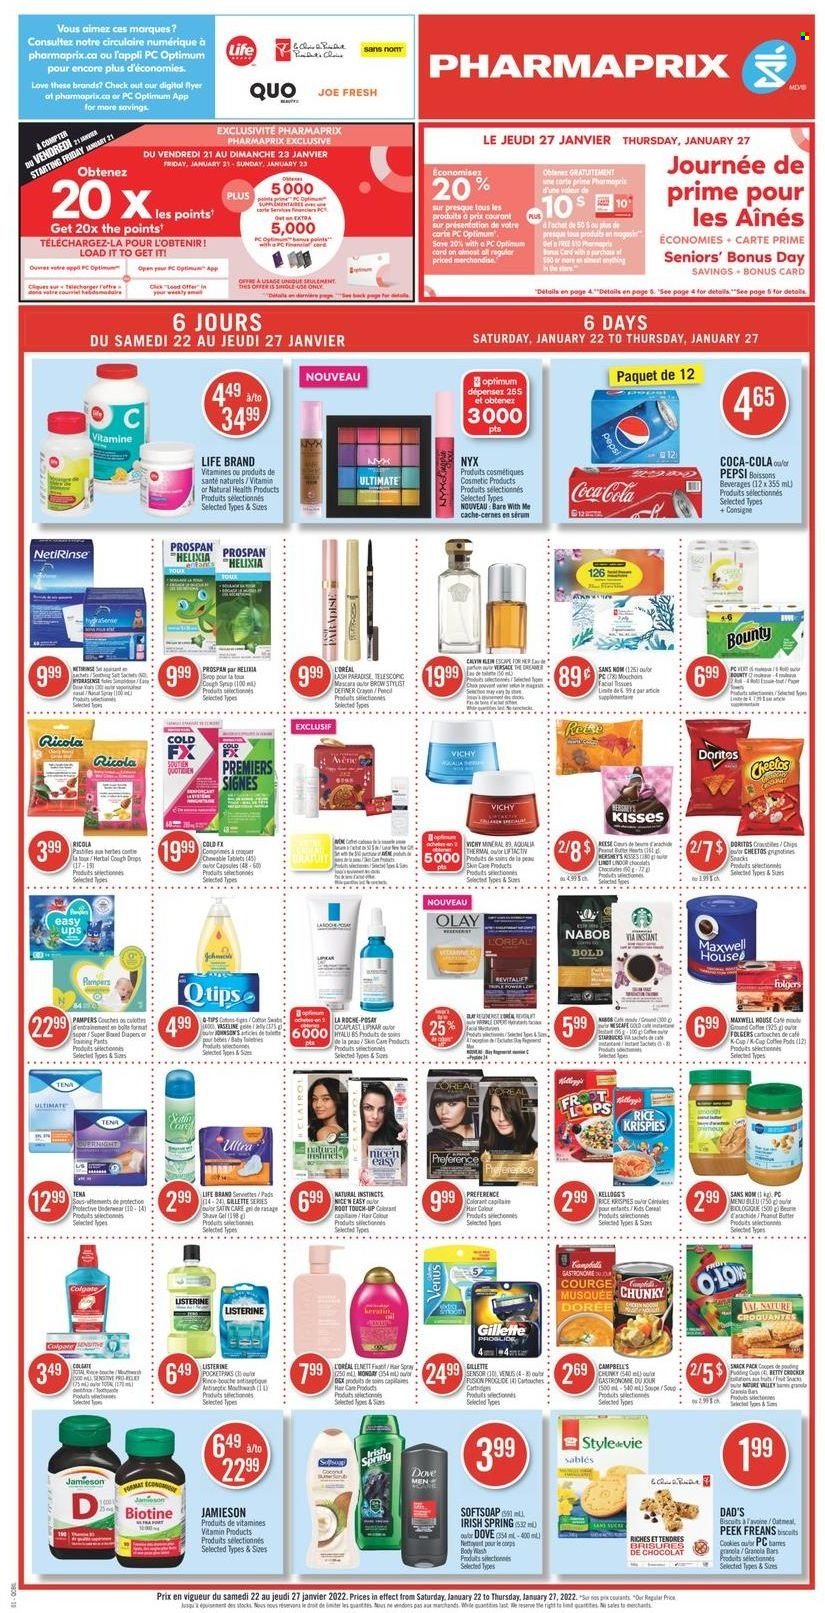 thumbnail - Pharmaprix Flyer - January 22, 2022 - January 27, 2022 - Sales products - Campbell's, cookies, Ricola, Doritos, Cheetos, granola bar, Rice Krispies, peanut butter, Coca-Cola, Pepsi, Folgers, pants, Softsoap, Vichy, L’Oréal, Olay, NYX Cosmetics, Root Touch-Up, keratin, shave gel, Venus, Dove, Gillette, Listerine, Pampers, chips. Page 1.